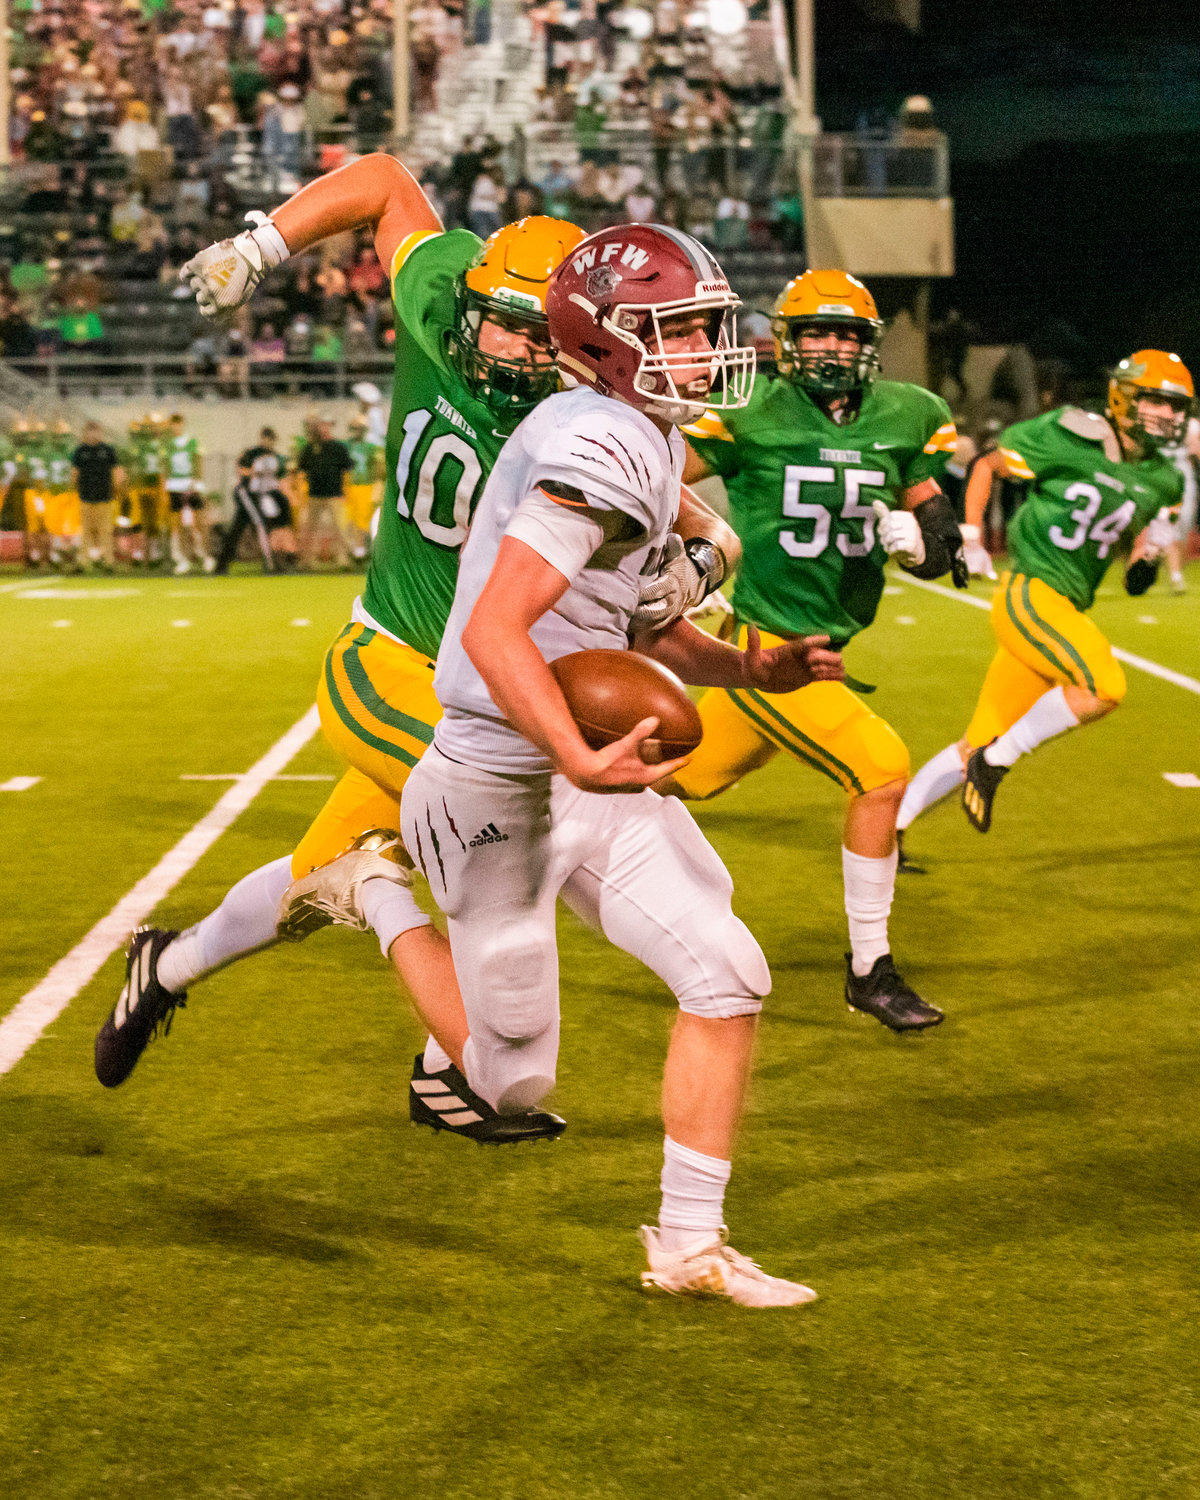 W.F. West’s quarterback Gavin Fugate (9) runs for a first down during a game against Tumwater Friday night.